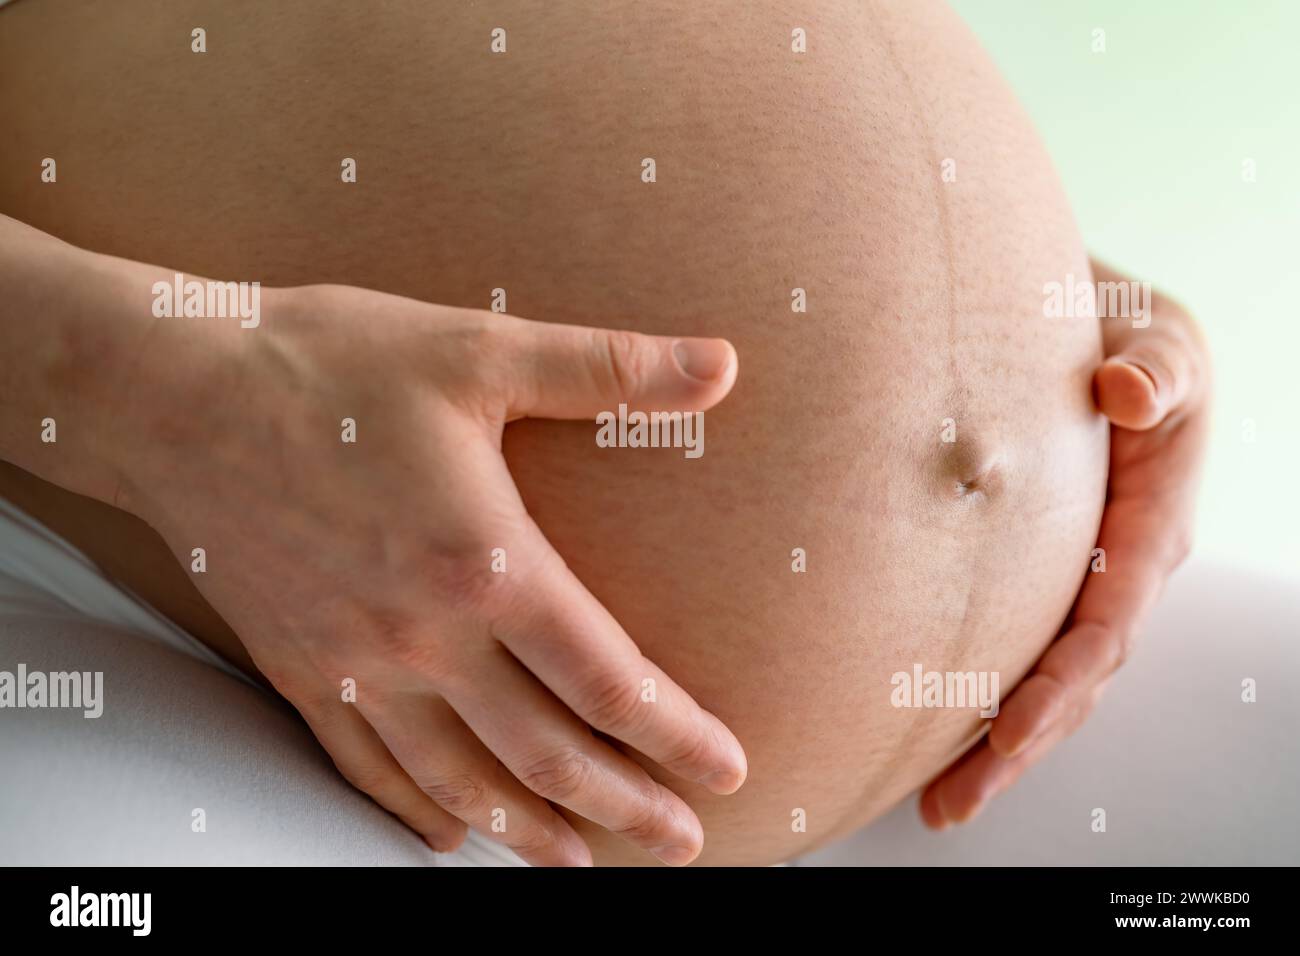 Description: Closeup of a mother sitting and gently holding her very round pregnant baby bump. Side angle view. Green background. Bright shot. Stock Photo